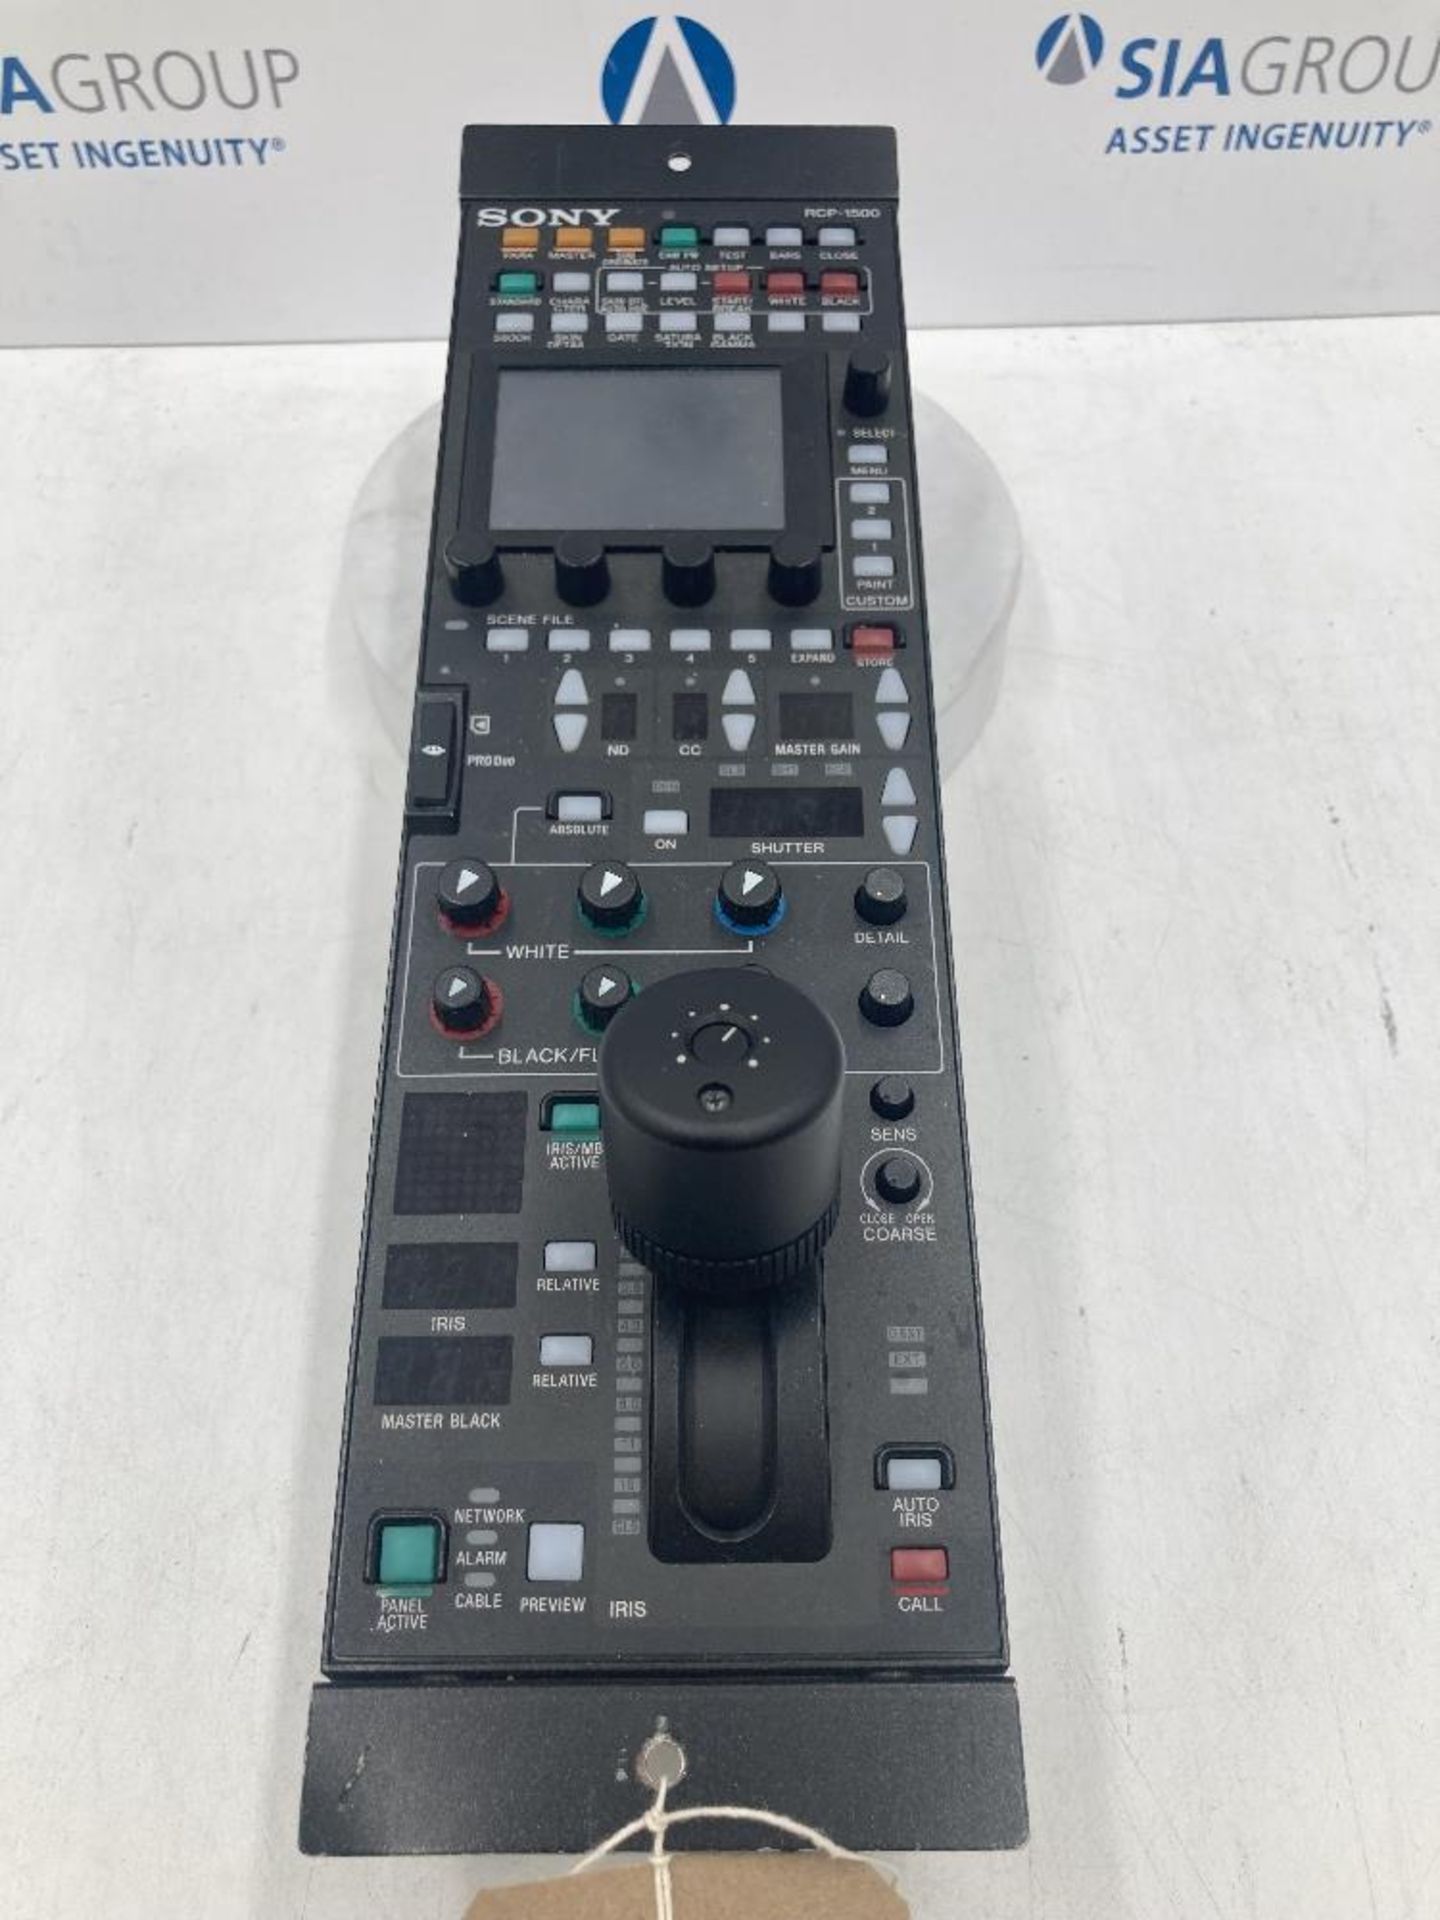 Sony RCP-1500 Remote Control Panel